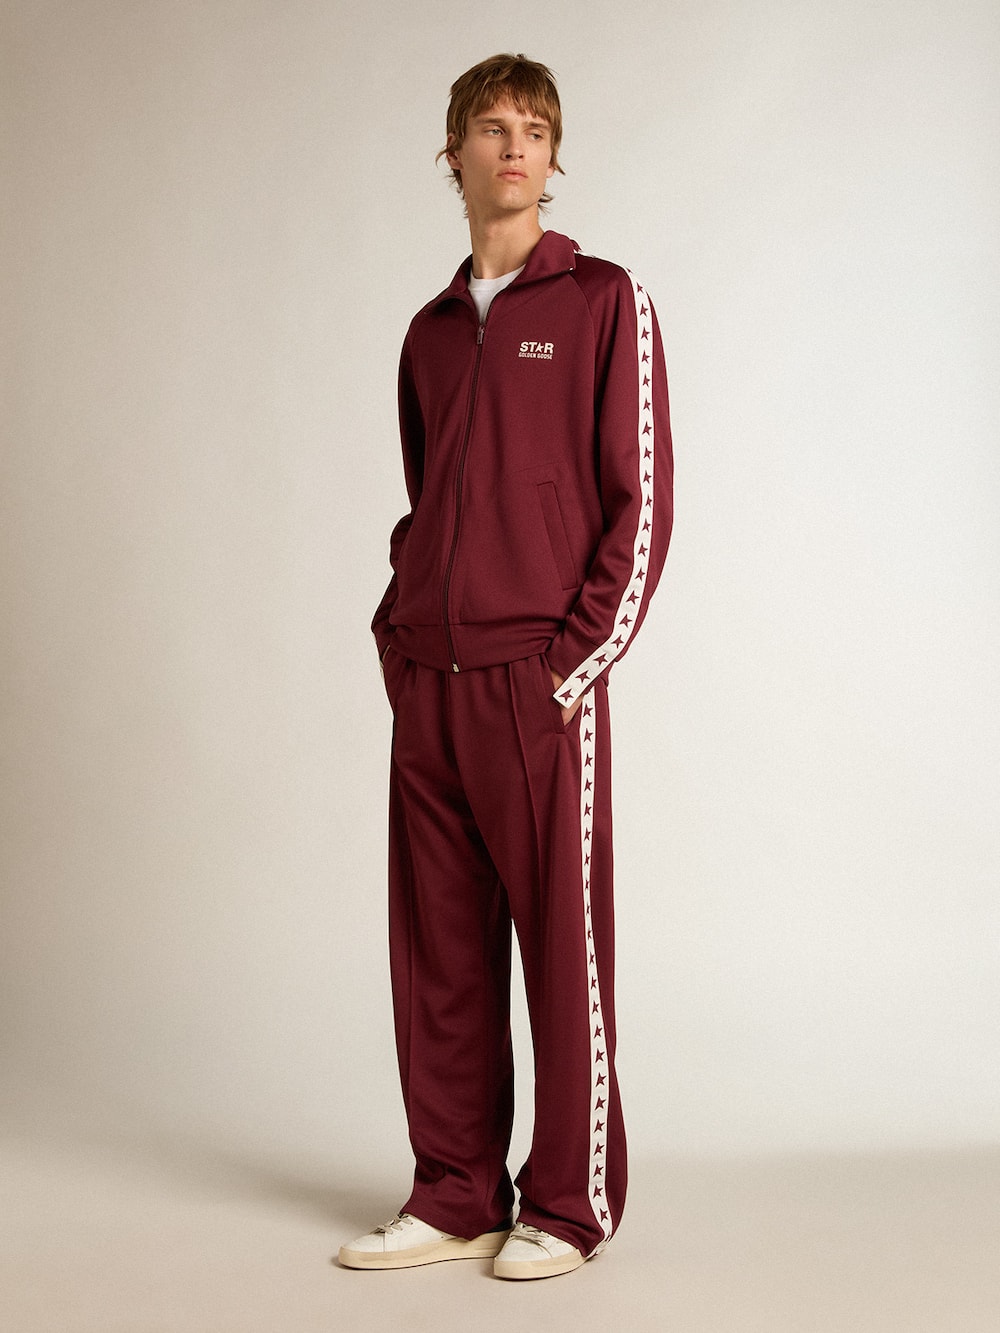 Golden Goose - Men’s burgundy joggers with stars on the sides in 